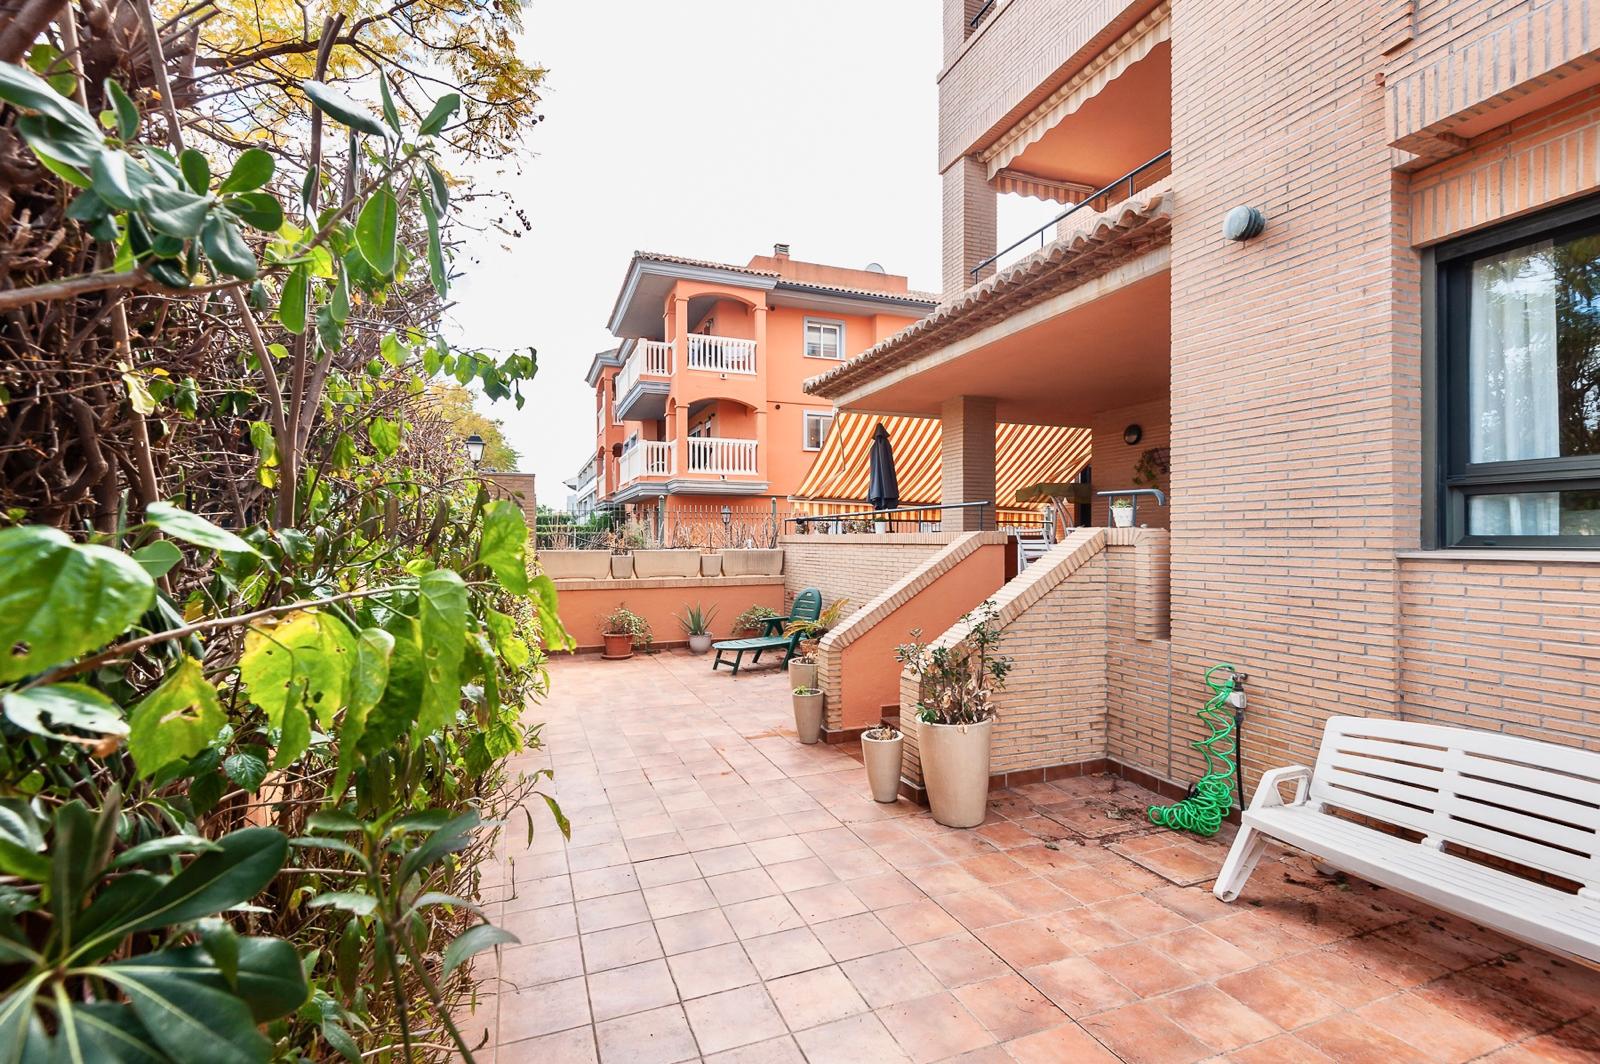 Exclusive apartment for sale in the first Montañar of Javea with 2 parking spaces and storage room